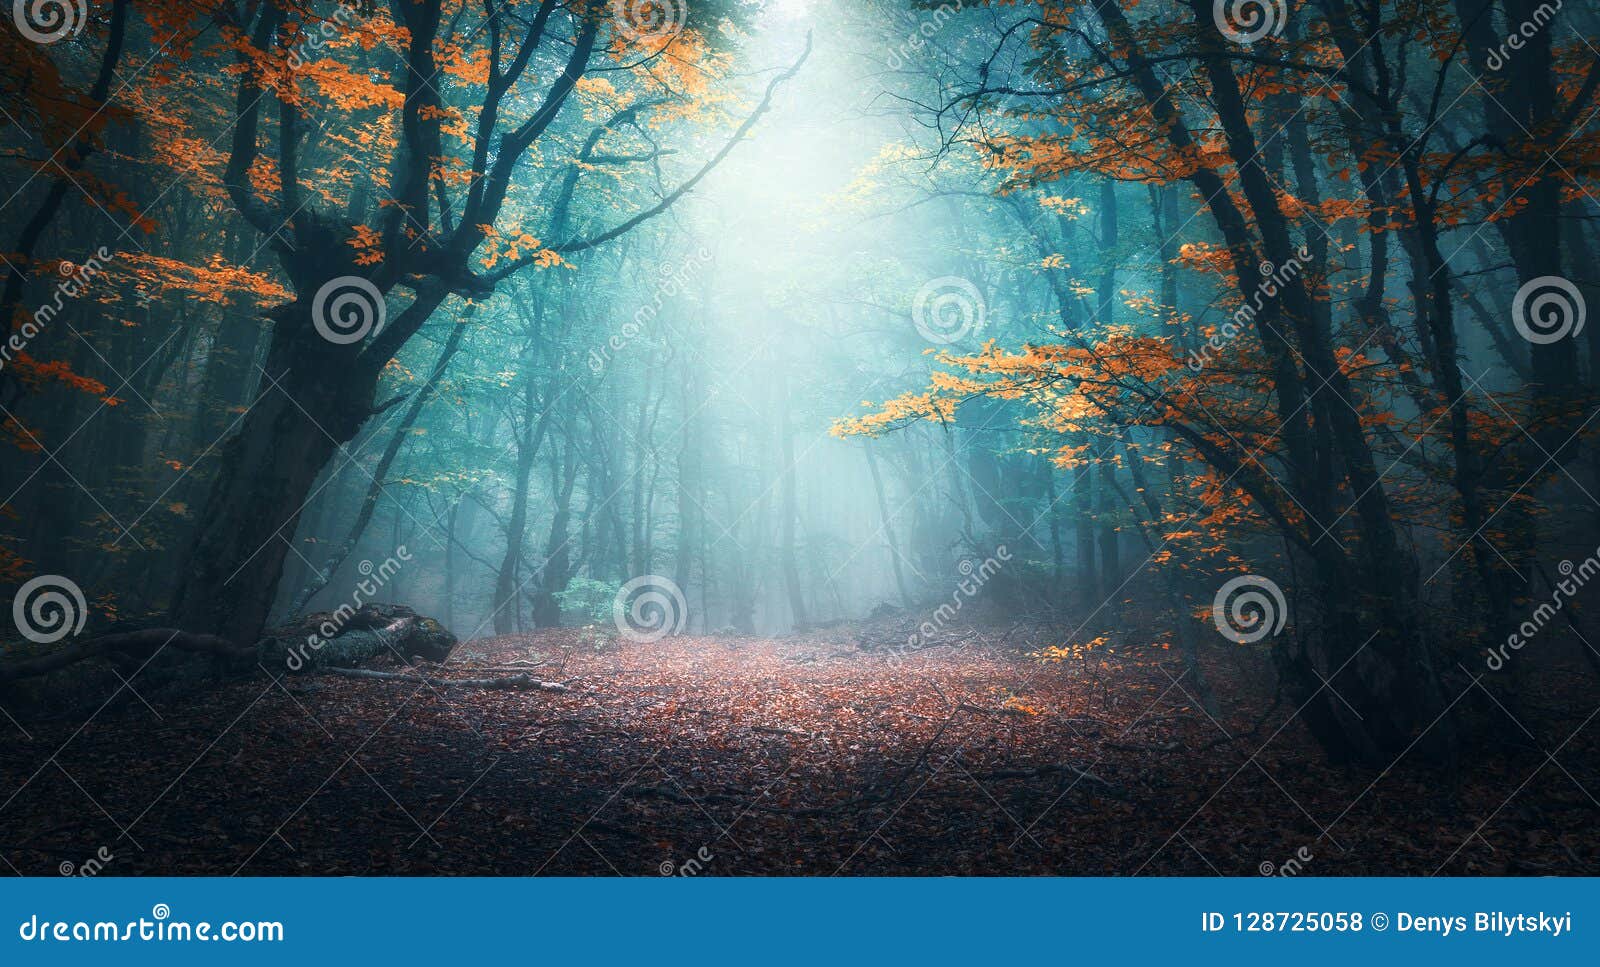 mystical forest in blue fog in autumn. colorful landscape